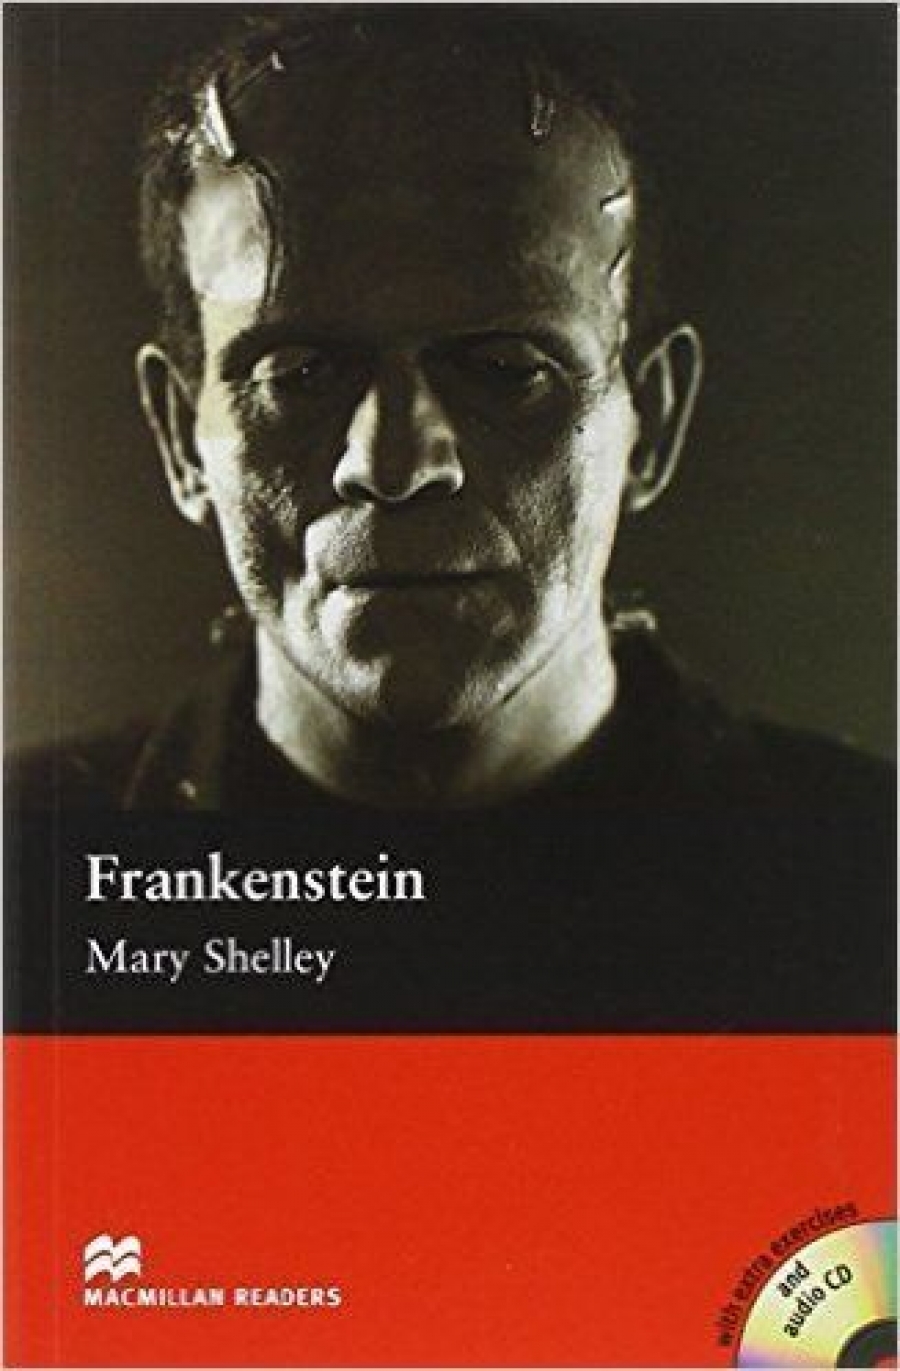 Mary Shelley, retold by Margaret Tarner Frankenstein (with Audio CD) 